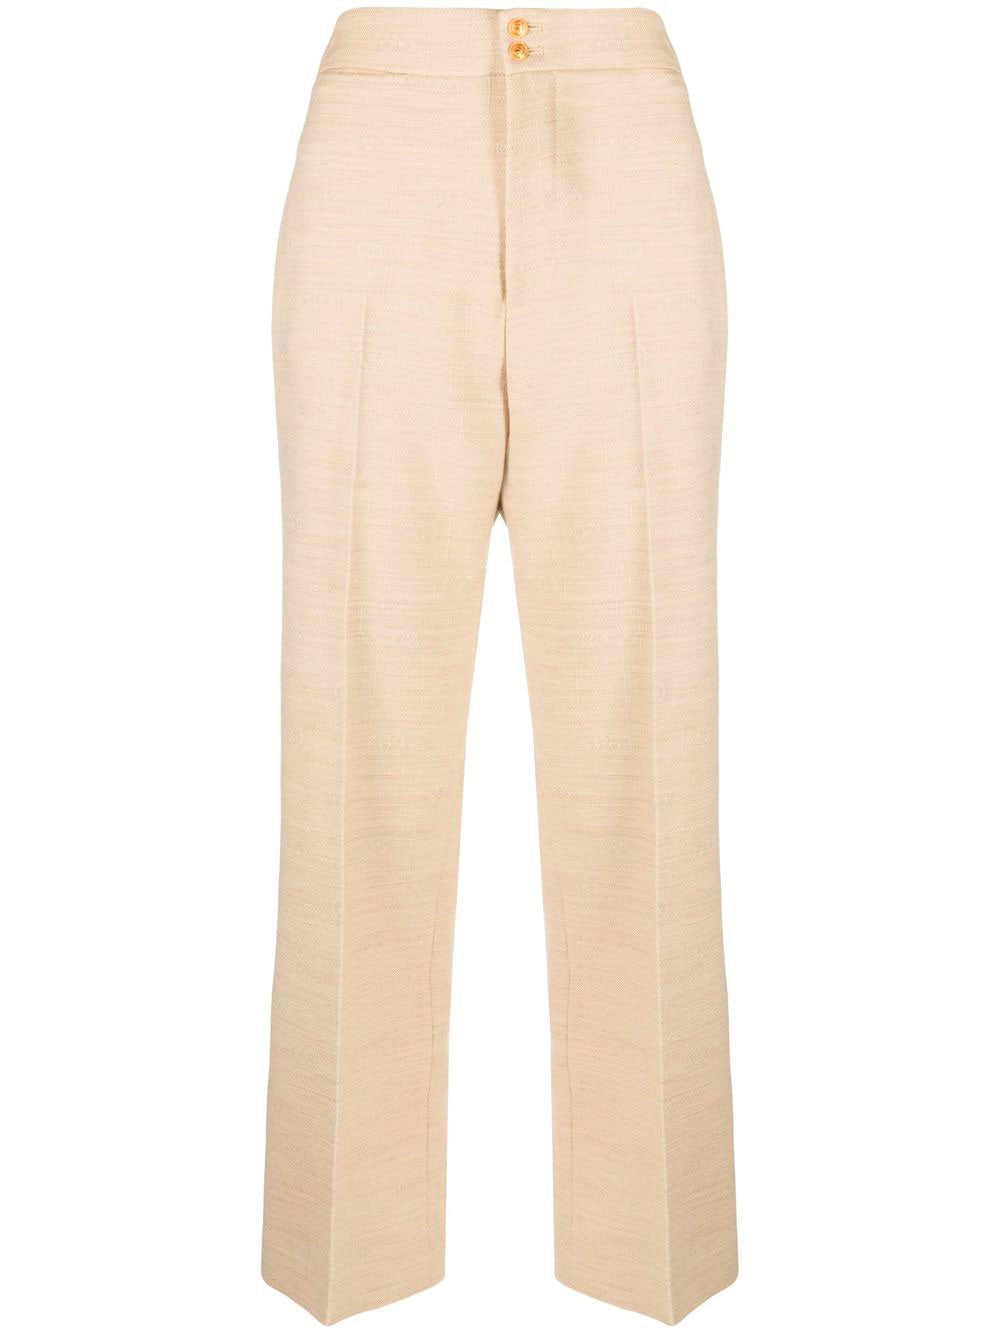 GG Supreme tailored trousers